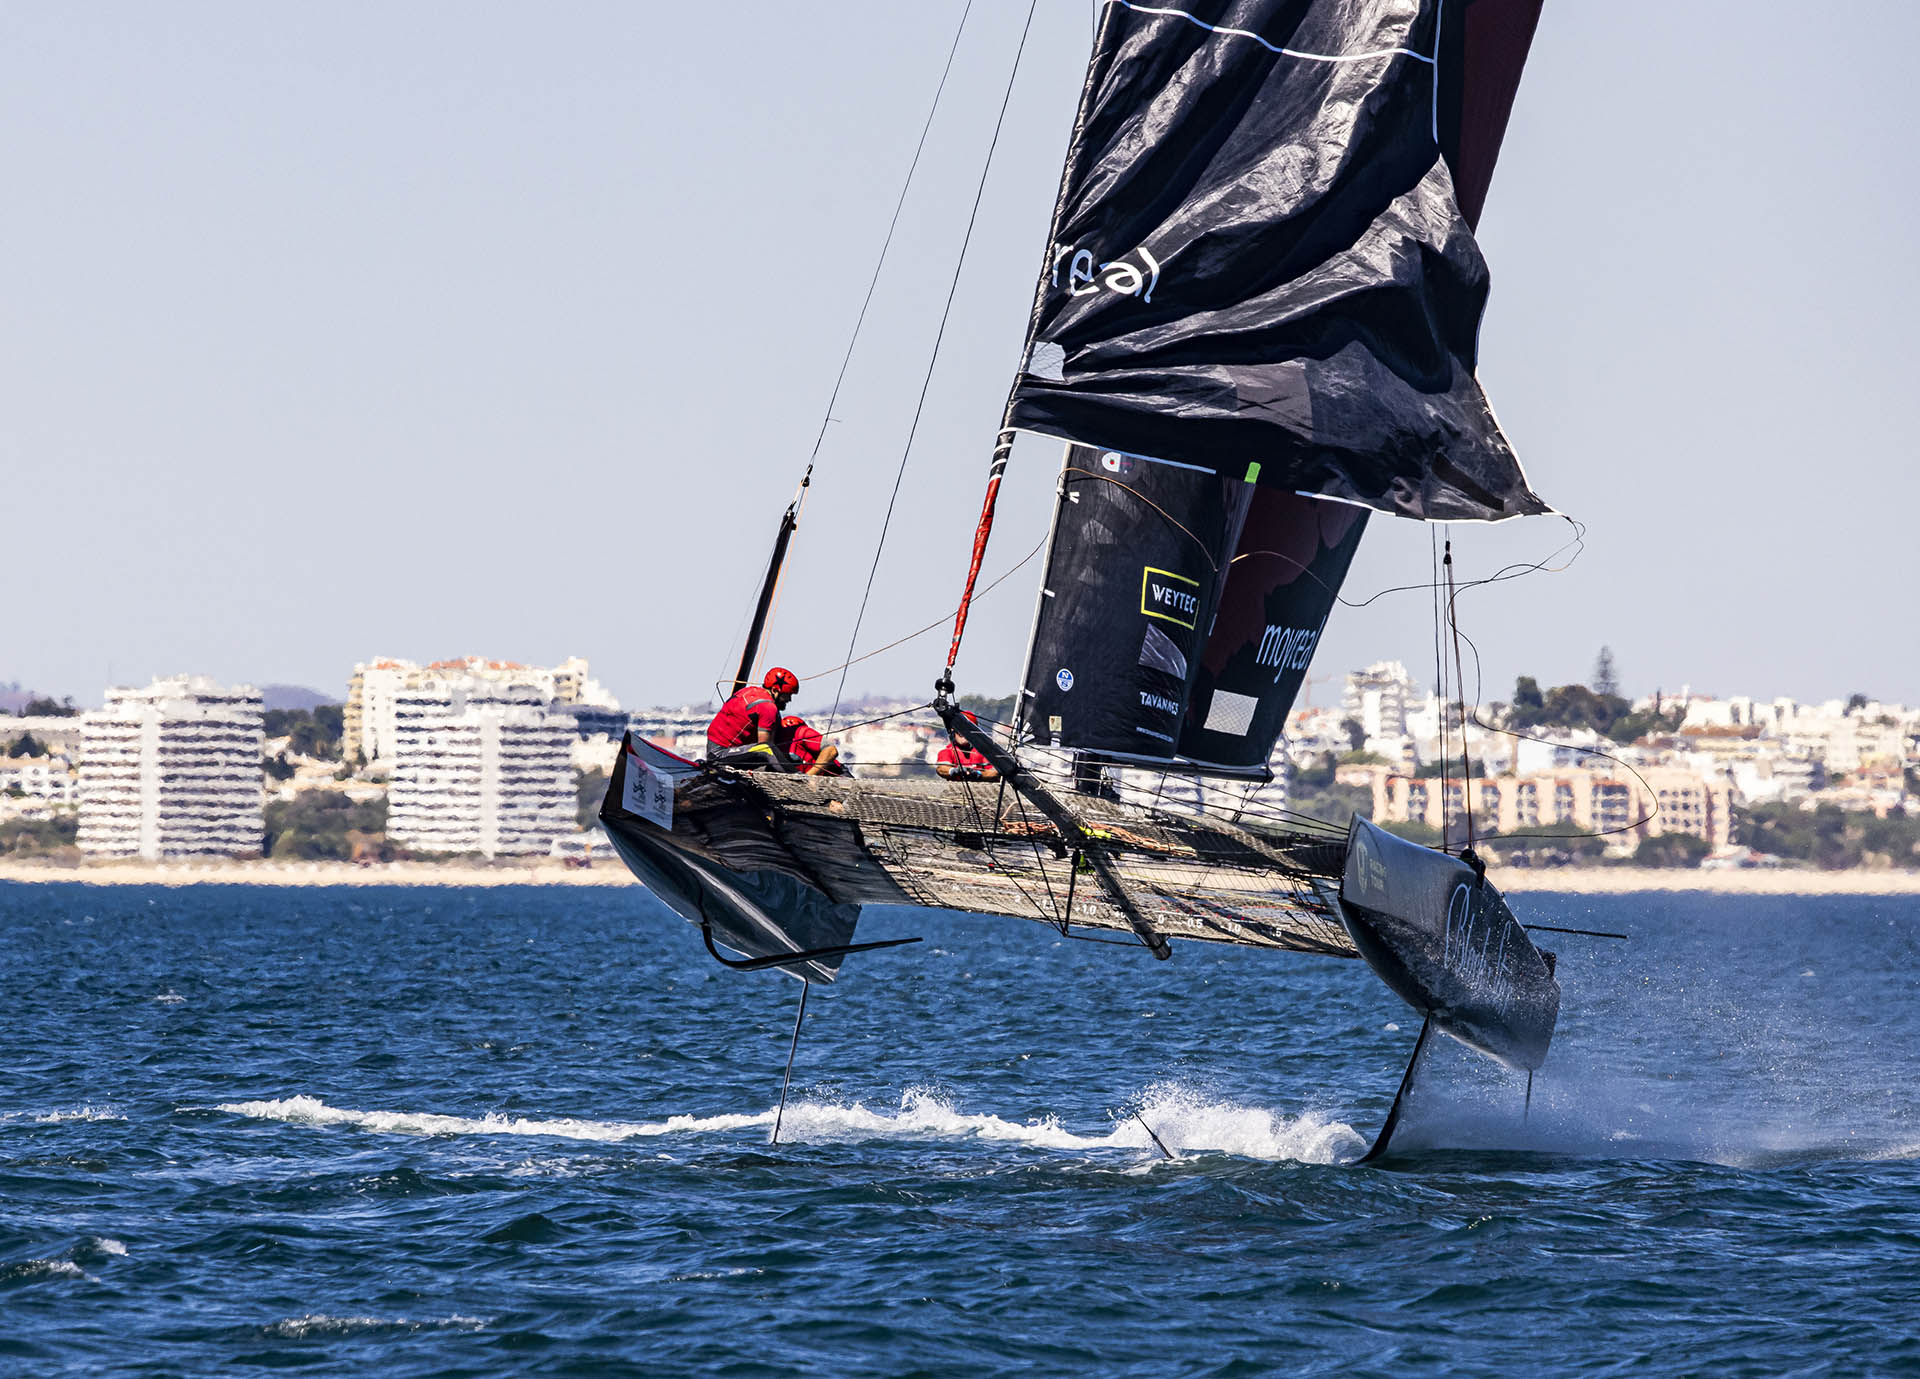 Sailing a foiling catamaran always pushes the limits. Not only for the crew members, but also for the material.